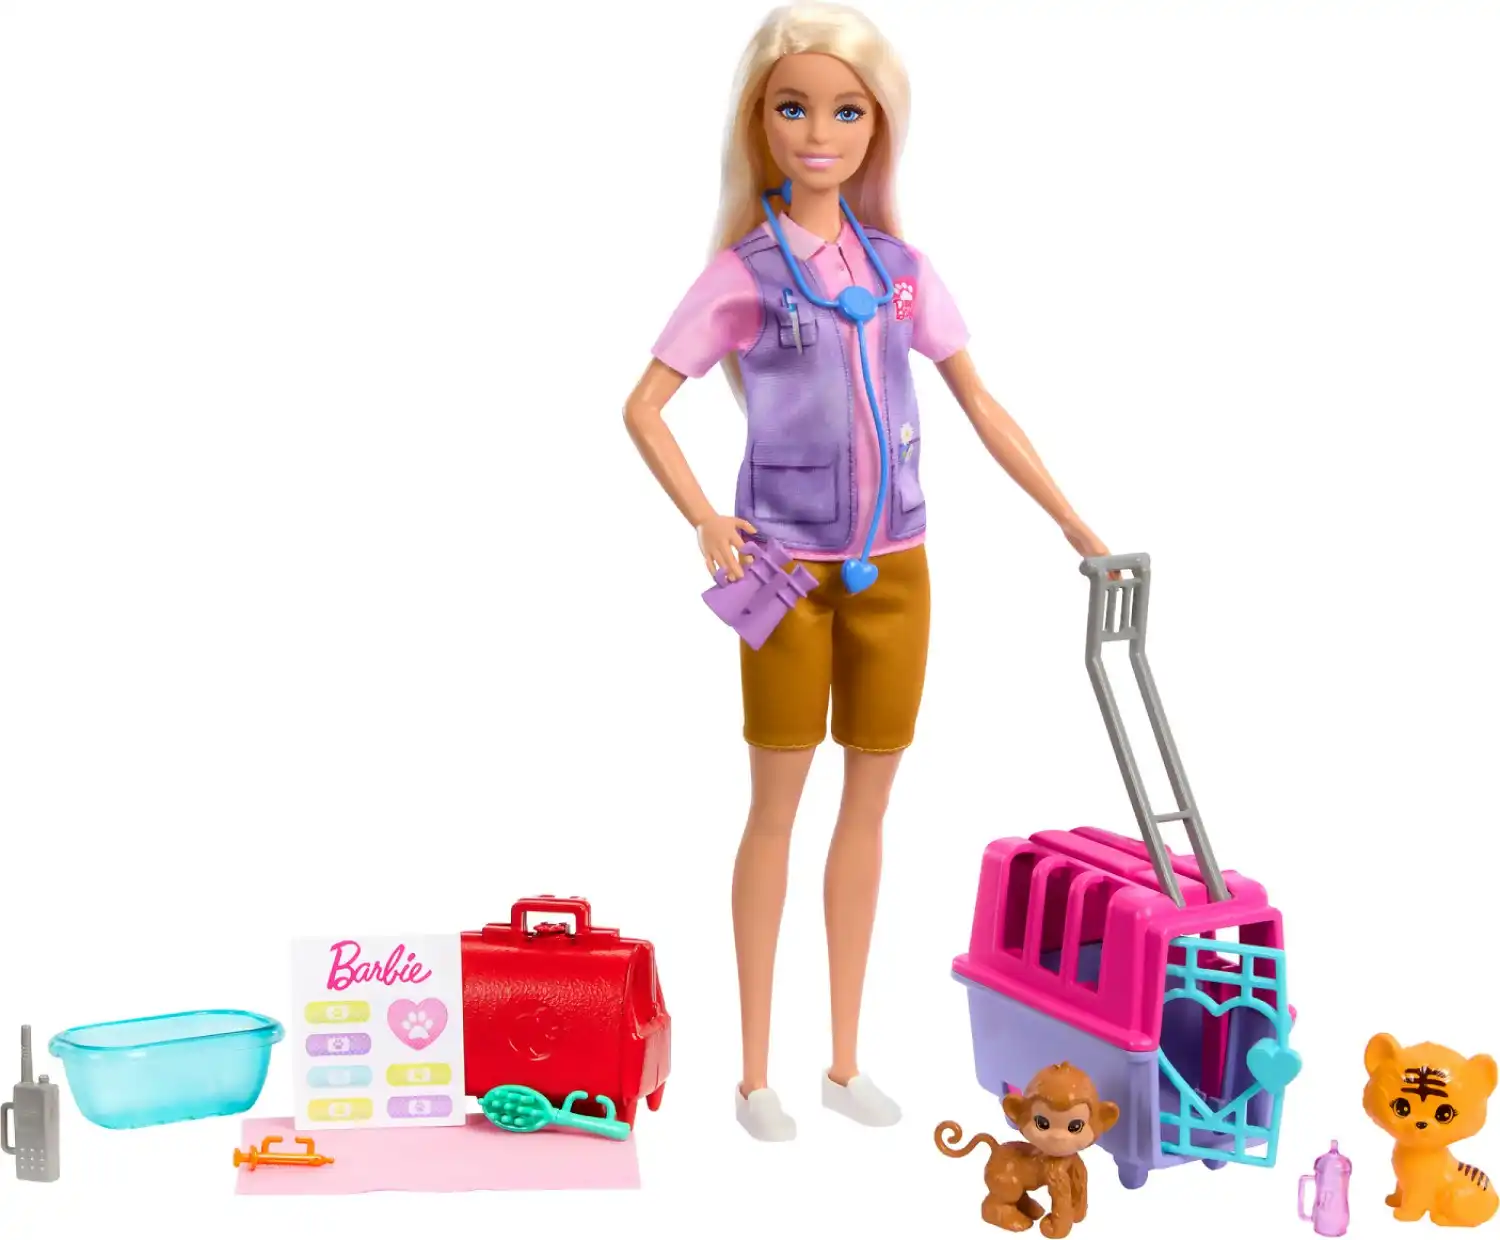 Barbie - Animal Rescue & Recovery Playset With Blonde Doll 2 Animal Figures & Accessories